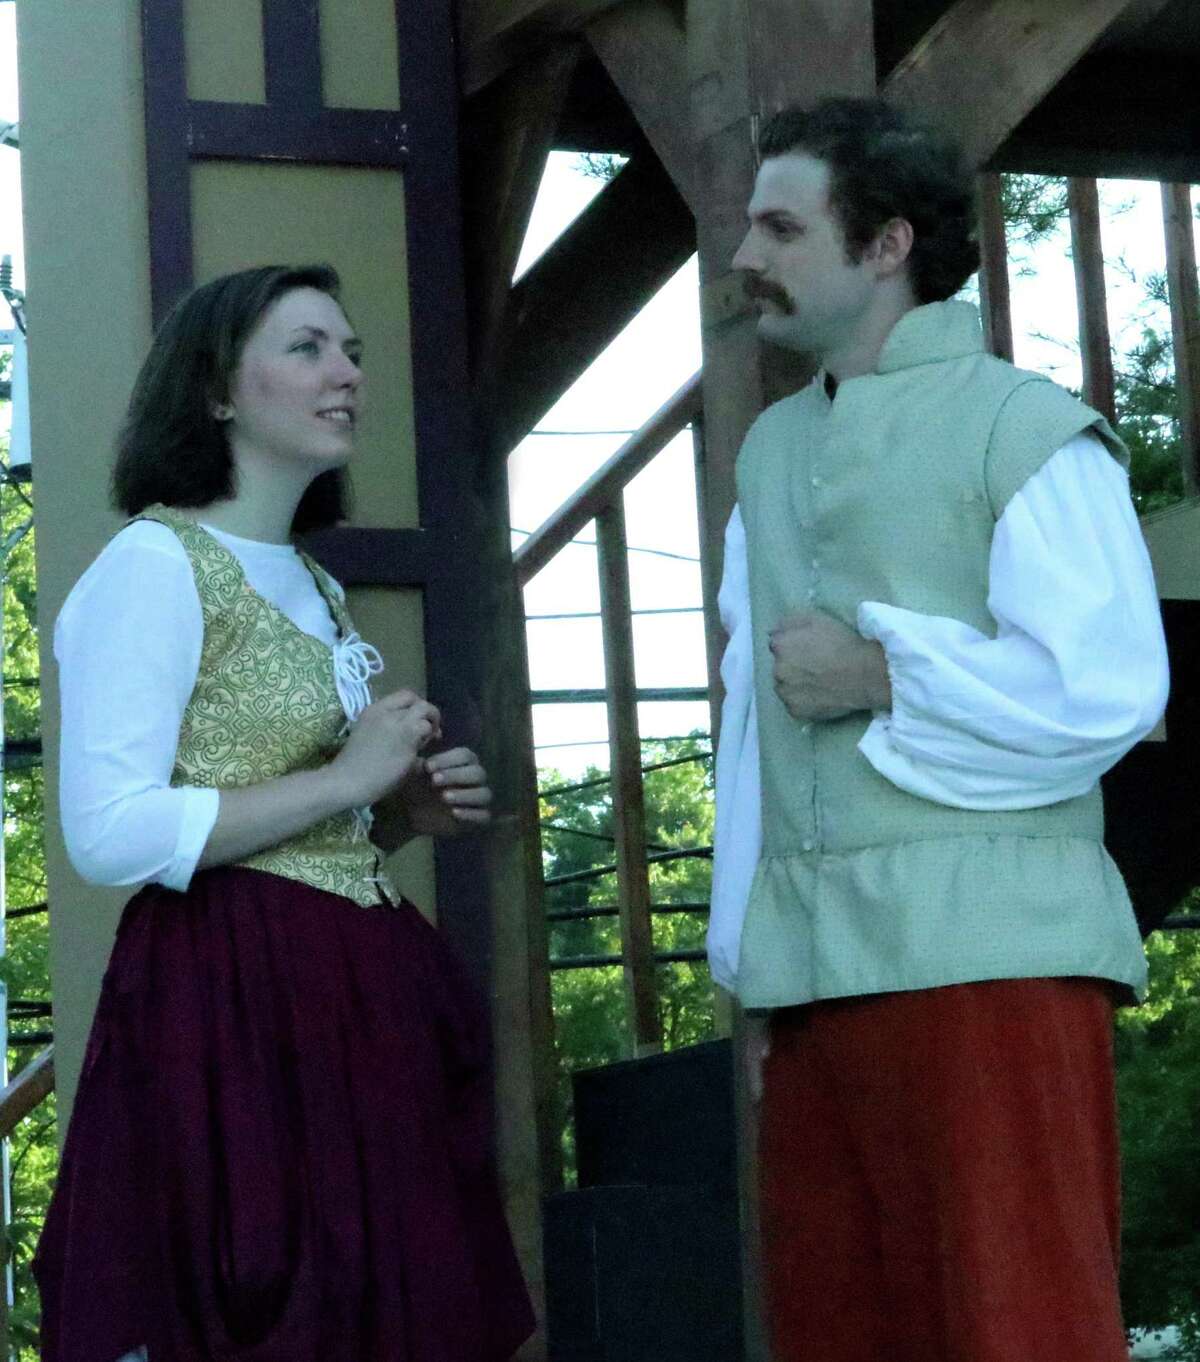 In Shakespeare’s “Much Ado About Nothing,” young lovers Hero and Claudio, played here by Charlotte Roth and Tyler Small, have their marriage plans thwarted by the villainous Don John.